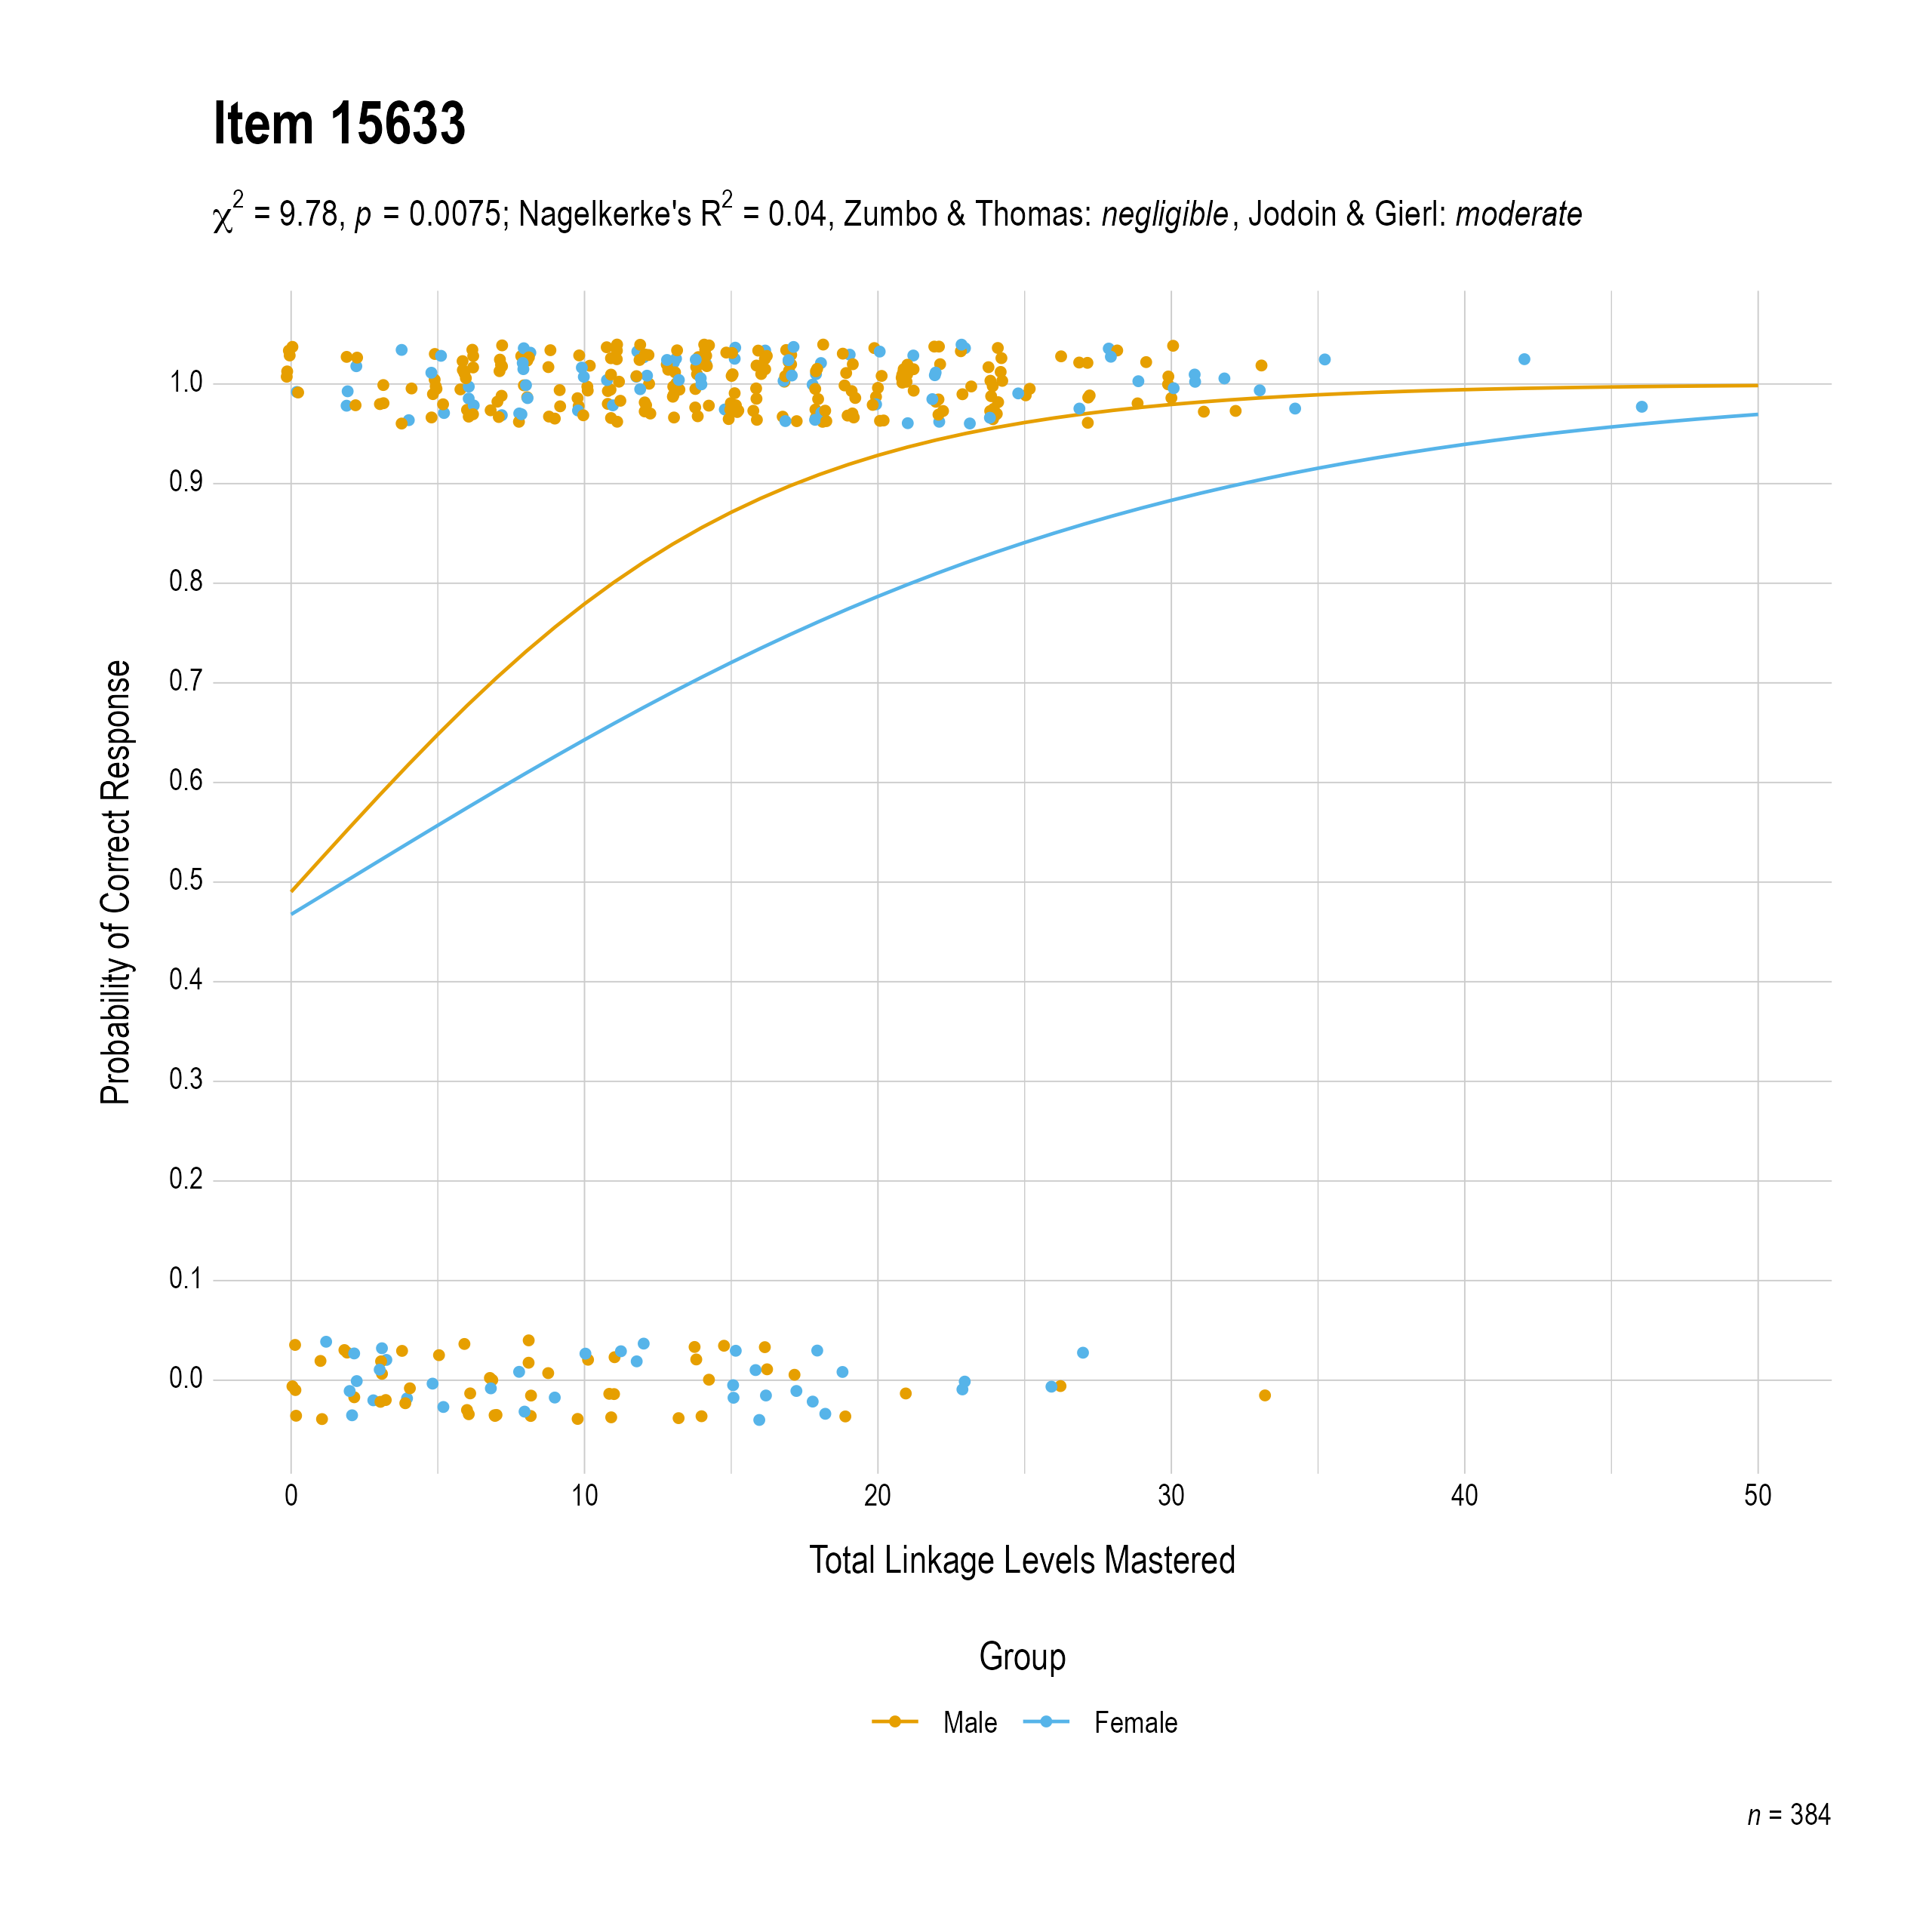 The plot of the combined gender differential item function evidence for English language arts item 15633. The figure contains points shaded by group. The figure also contains a logistic regression curve for each group. The total linkage levels mastered in is on the x-axis, and the probability of a correct response is on the y-axis.